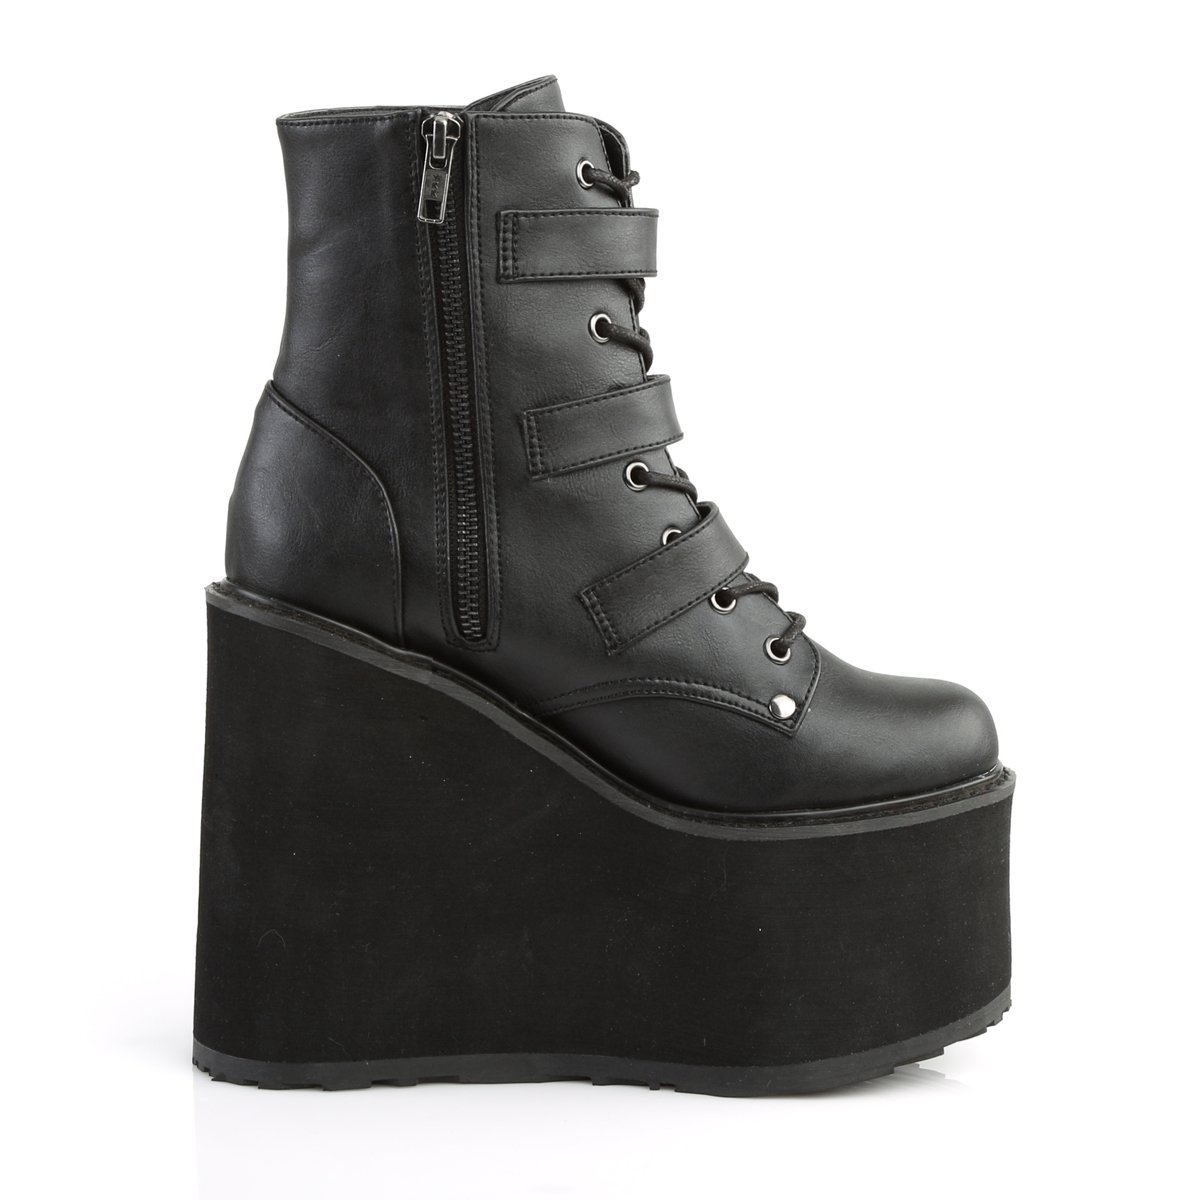 Demonia Swing-103 Women's Ankle Boots | Buy Sexy Shoes at Shoefreaks.ca